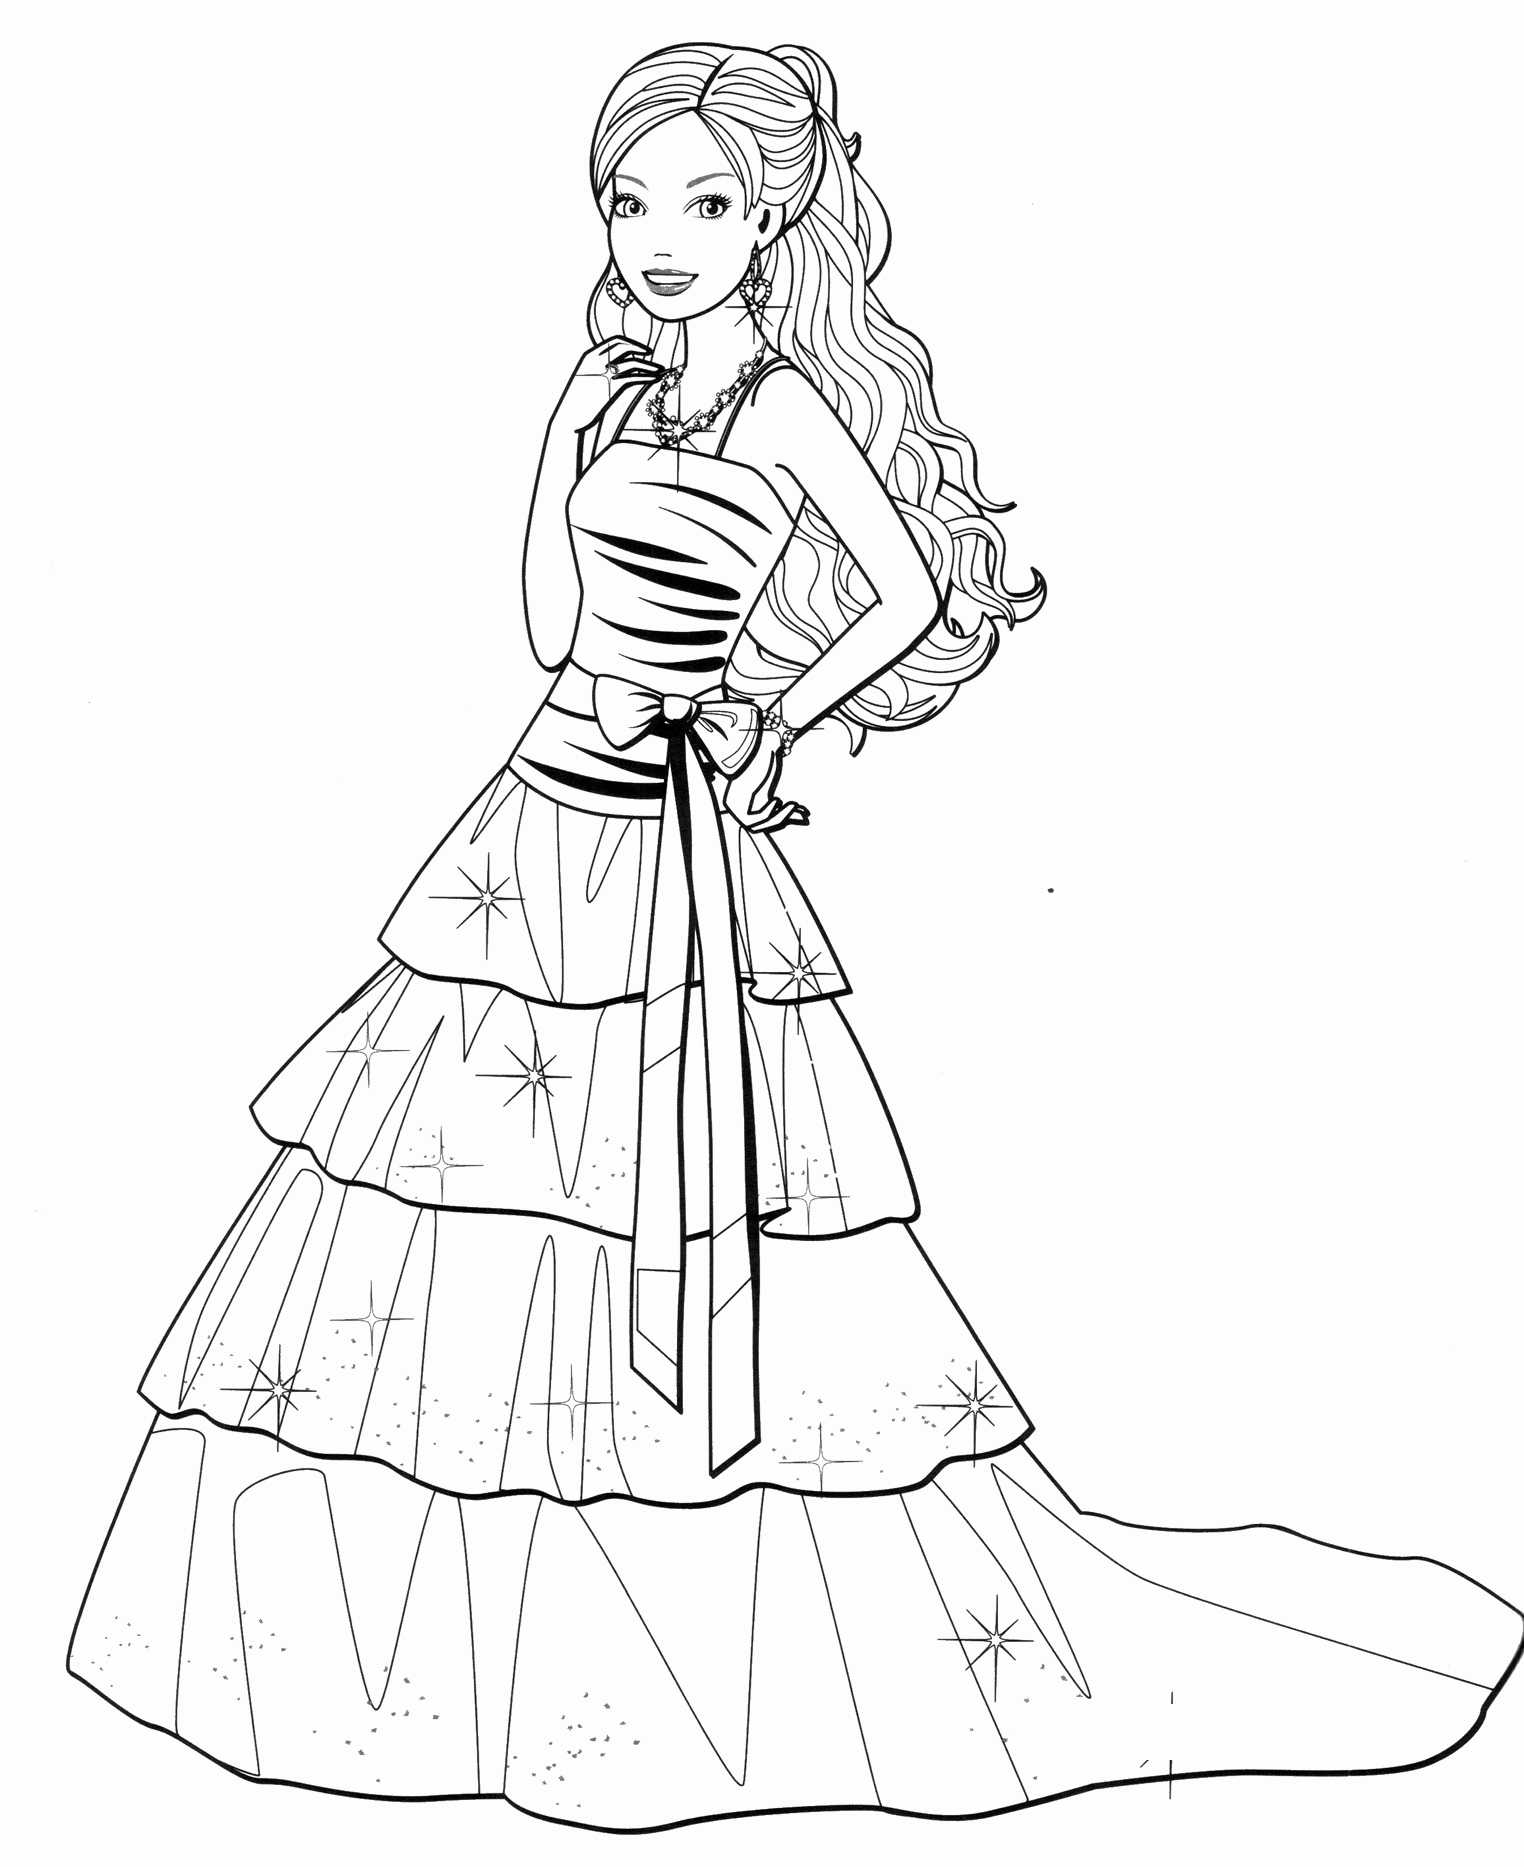 barbie wedding coloring pages